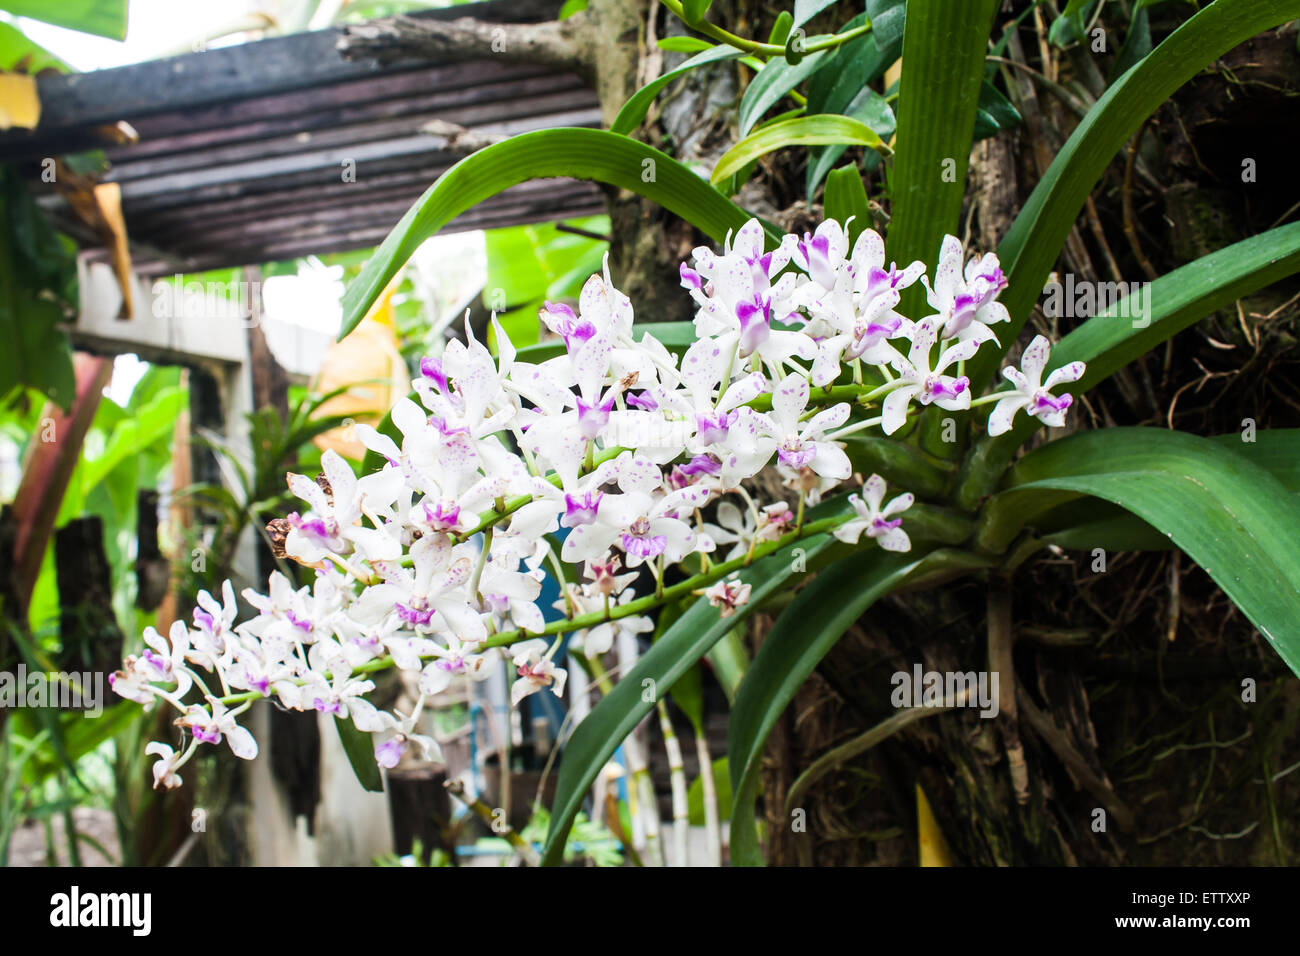 Beautiful Orchid, Rhynchostylis sp. Blooming in a Garden Stock Photo